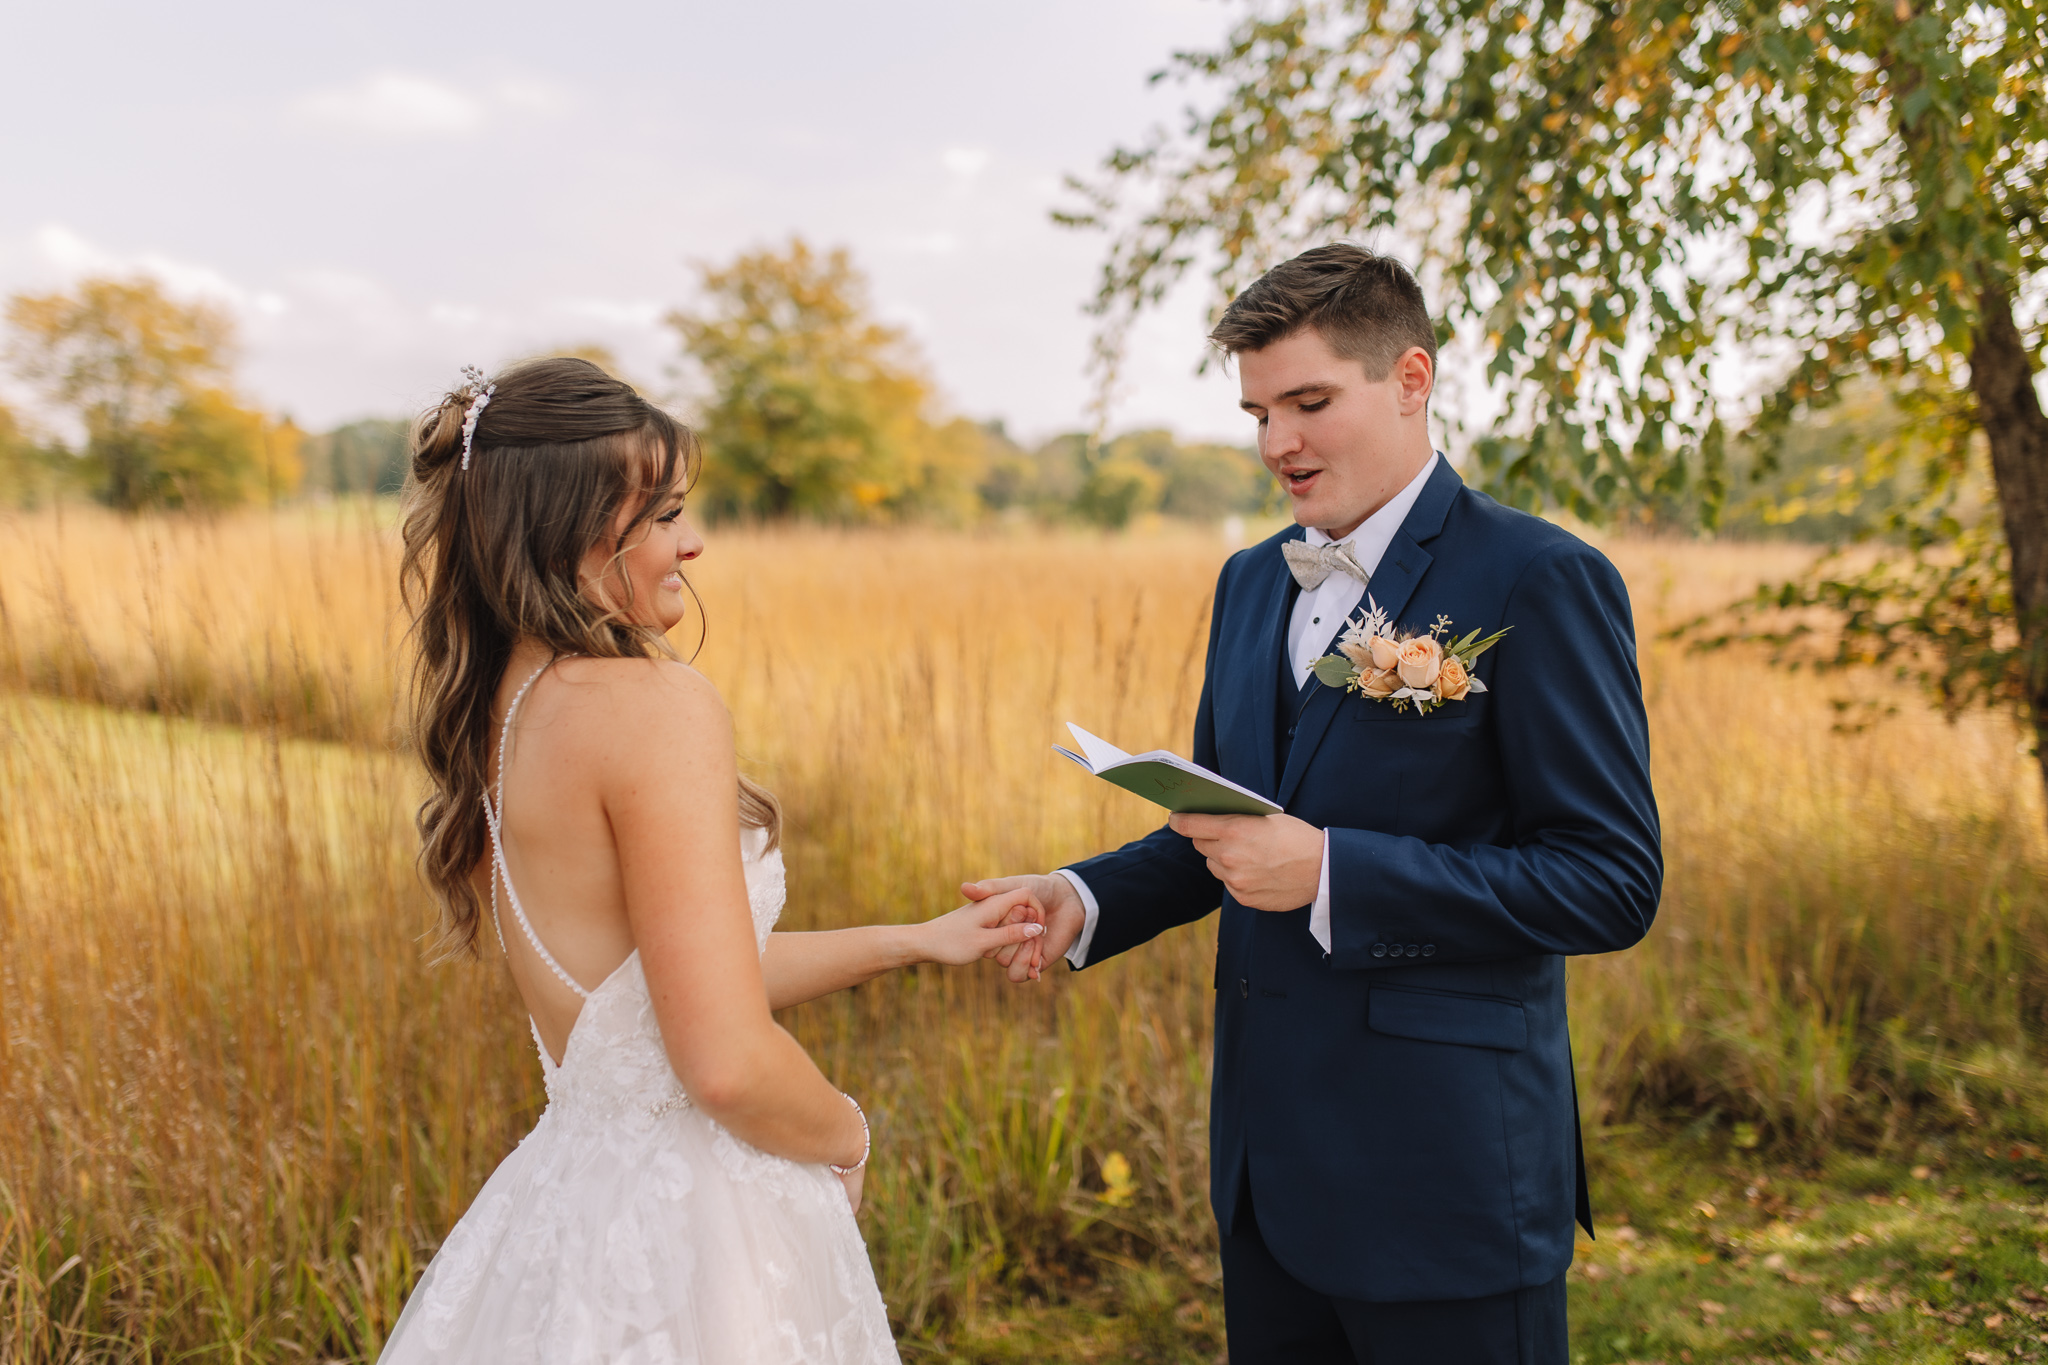 A groom reading private vows to his bride in a field